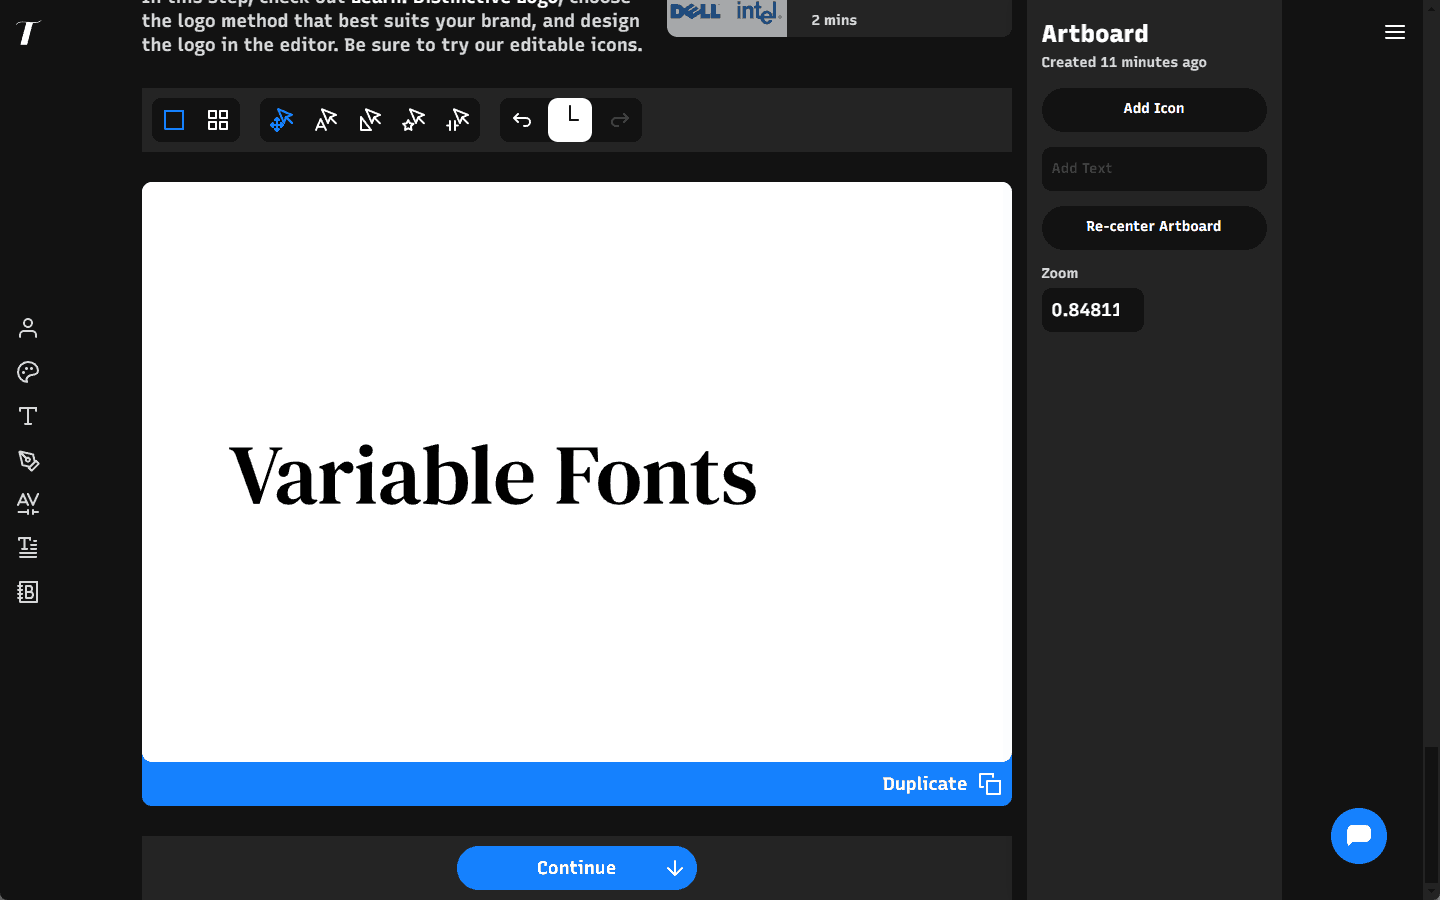 image: Variable Fonts Support allows for precise adjustments of weight and other variable properties with an intuitive slider control.